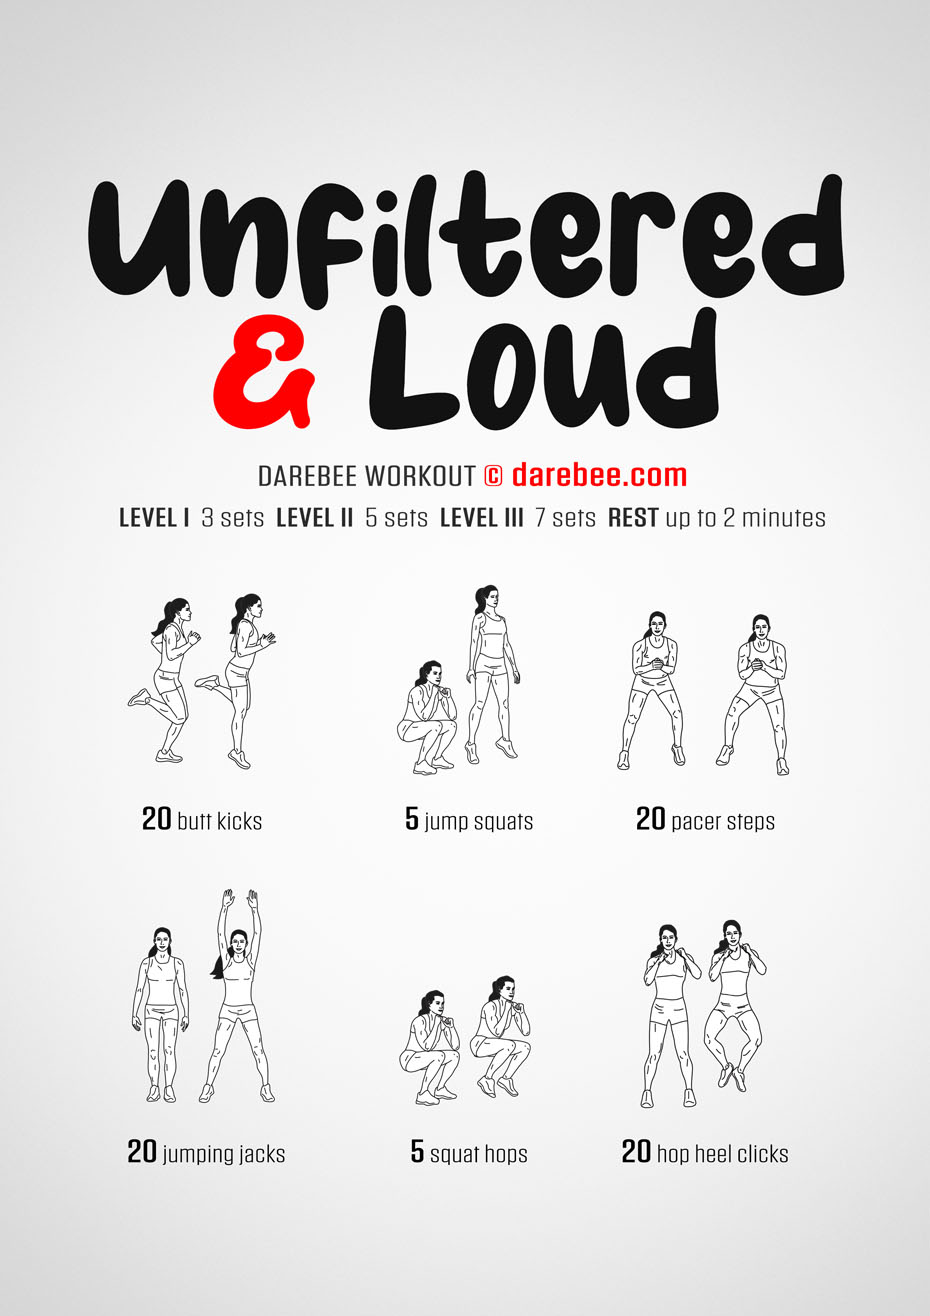 Unfiltered and Loud lets you cut loose and move your body in a highly energetic, fun way.